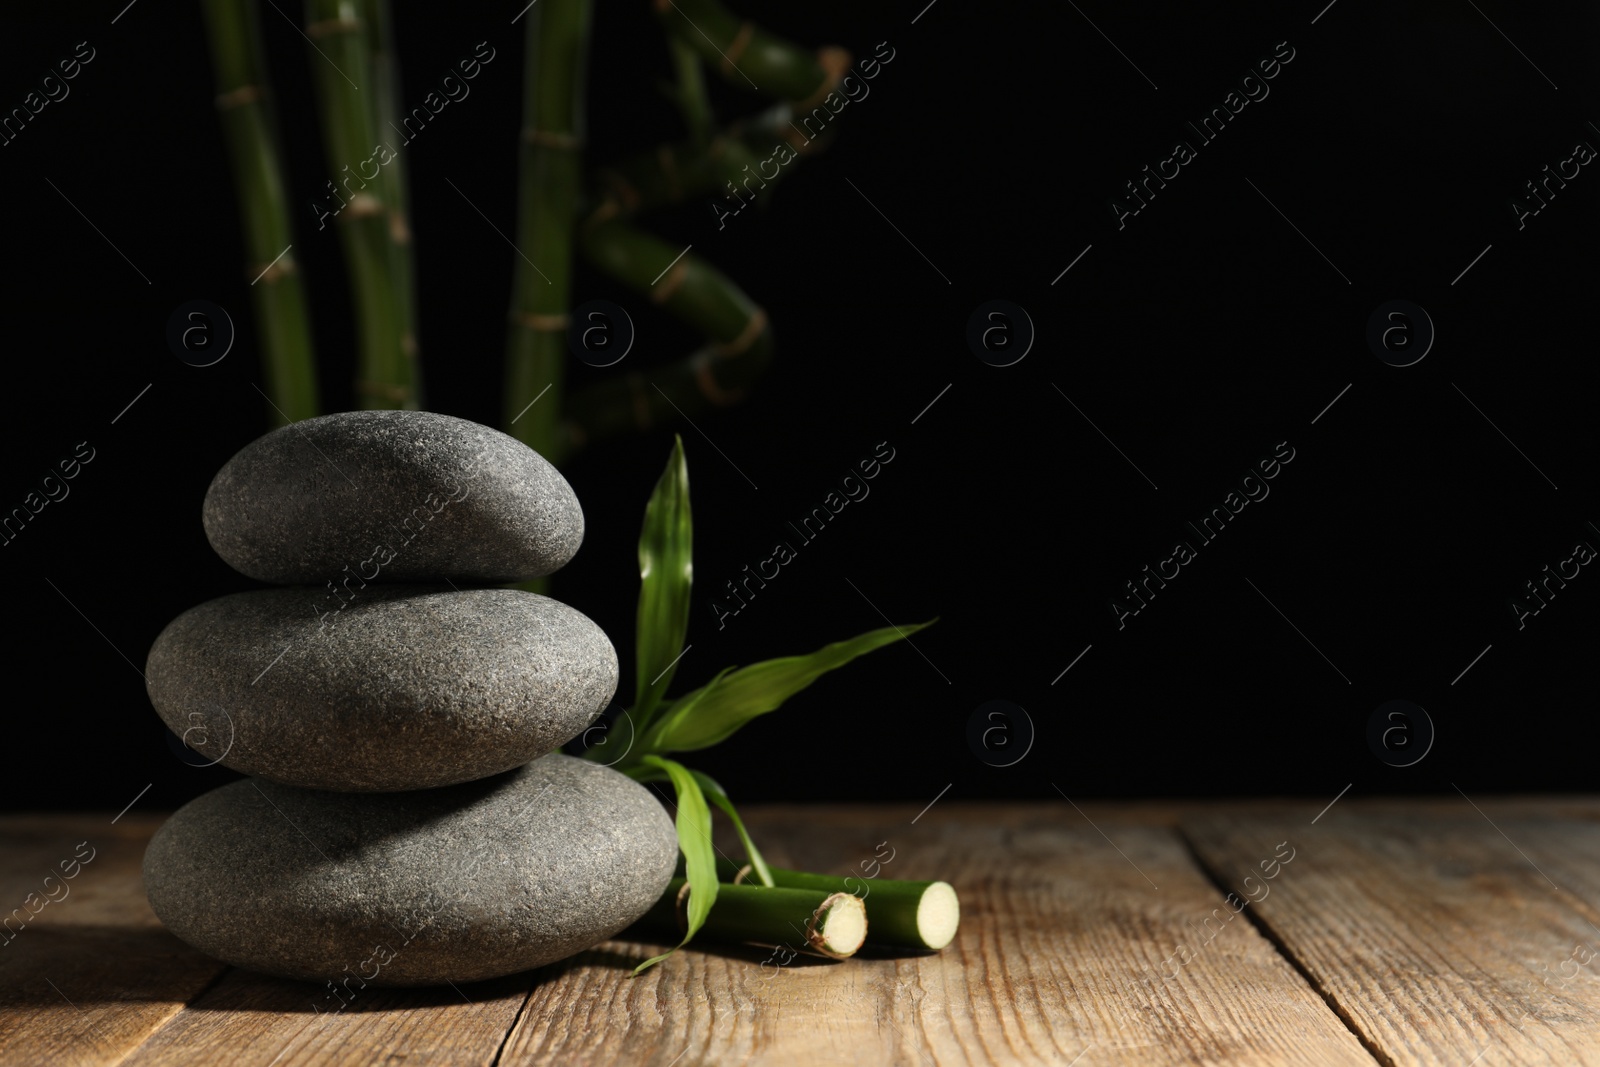 Photo of Spa stones and bamboo stems on wooden table against dark background, space for text